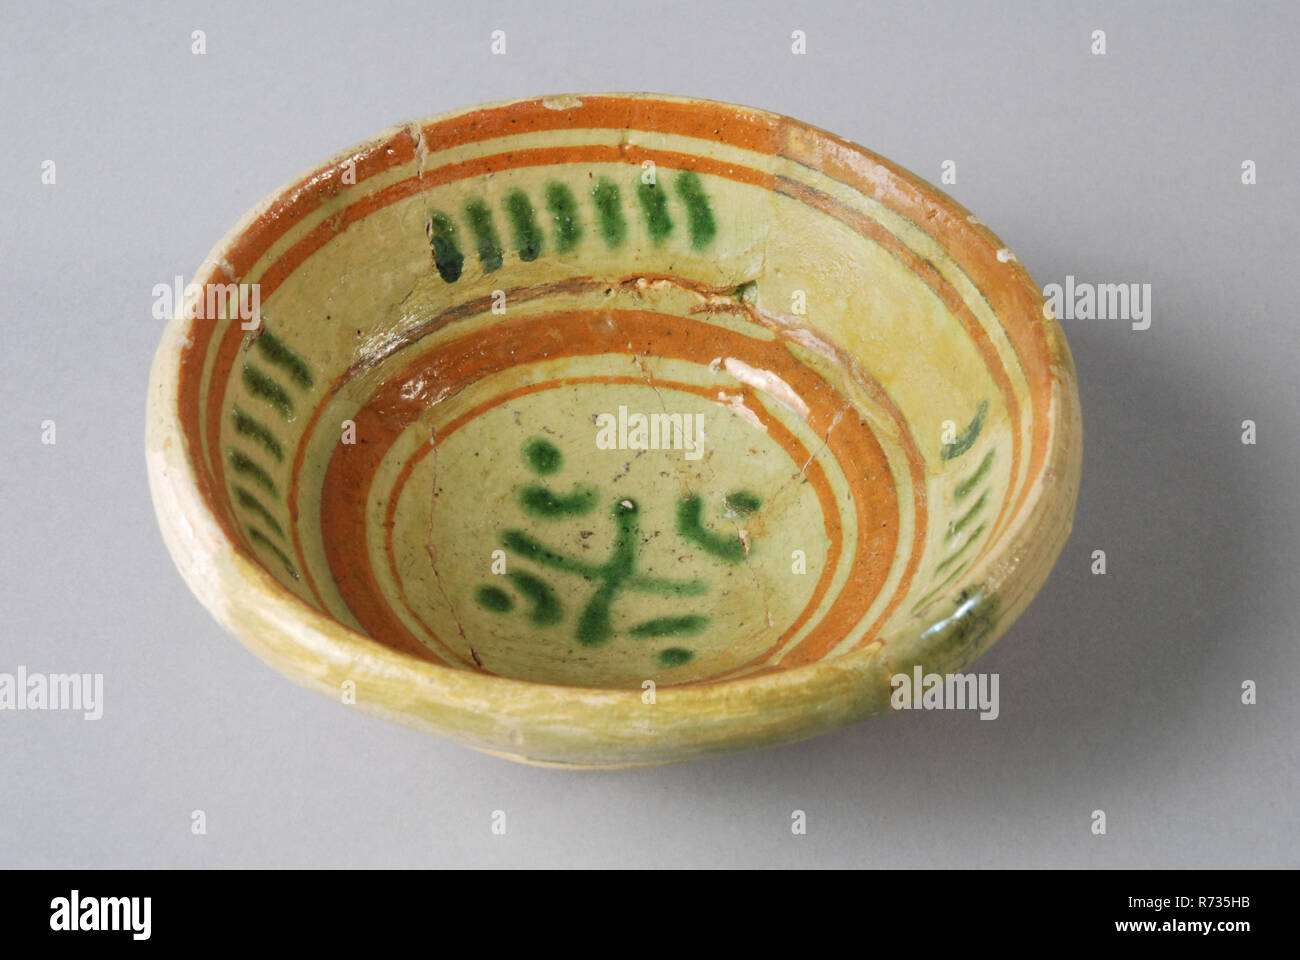 Pottery comes on small stand, gray shard, with circles and stripes in silt decoration, bowl bowl tableware holder soil find ceramic earthenware glaze lead glaze, hand turned decorated glazed decorated fried ring lead Lead glaze. White shard. Yellow and green silt decoration in circles between which green dot and stripe sludge trim. Deep bowl on small standing surface Sharply raised sidewall. Shoulder on the transition from mirror to bowl edge Restoration is repainted but in form poorly executed archeology underground pit Rotterdam City Triangle Groenendaal indigenous pottery import food servin Stock Photo